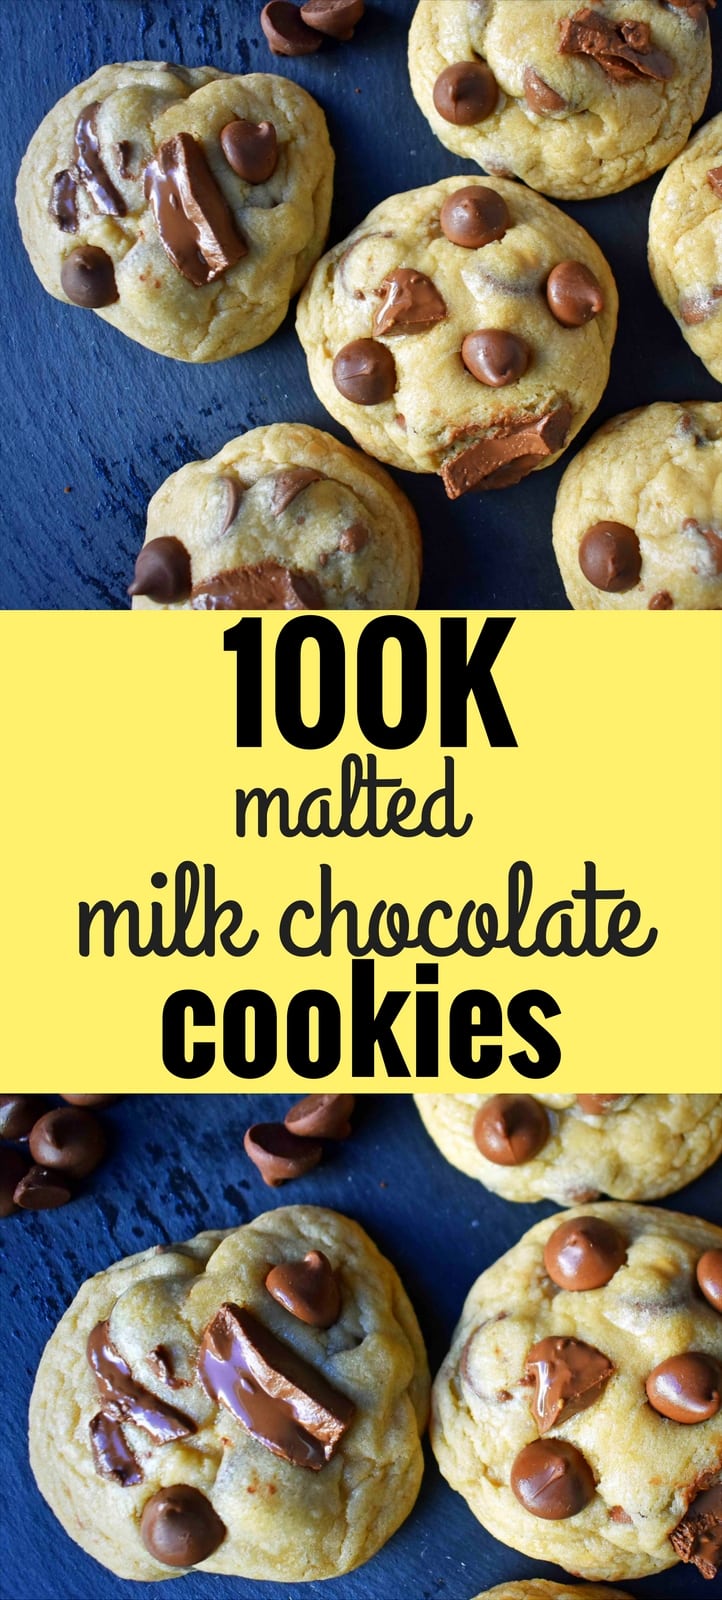 100K Malted Milk Chocolate Chip Cookies. Two unique, secret ingredients that set these cookies apart from the rest. Milk chocolate malt cookies made with vanilla malt powder and a touch of sweetened condensed milk make them the perfect chewy chocolate chip cookie. www.modernhoney.com